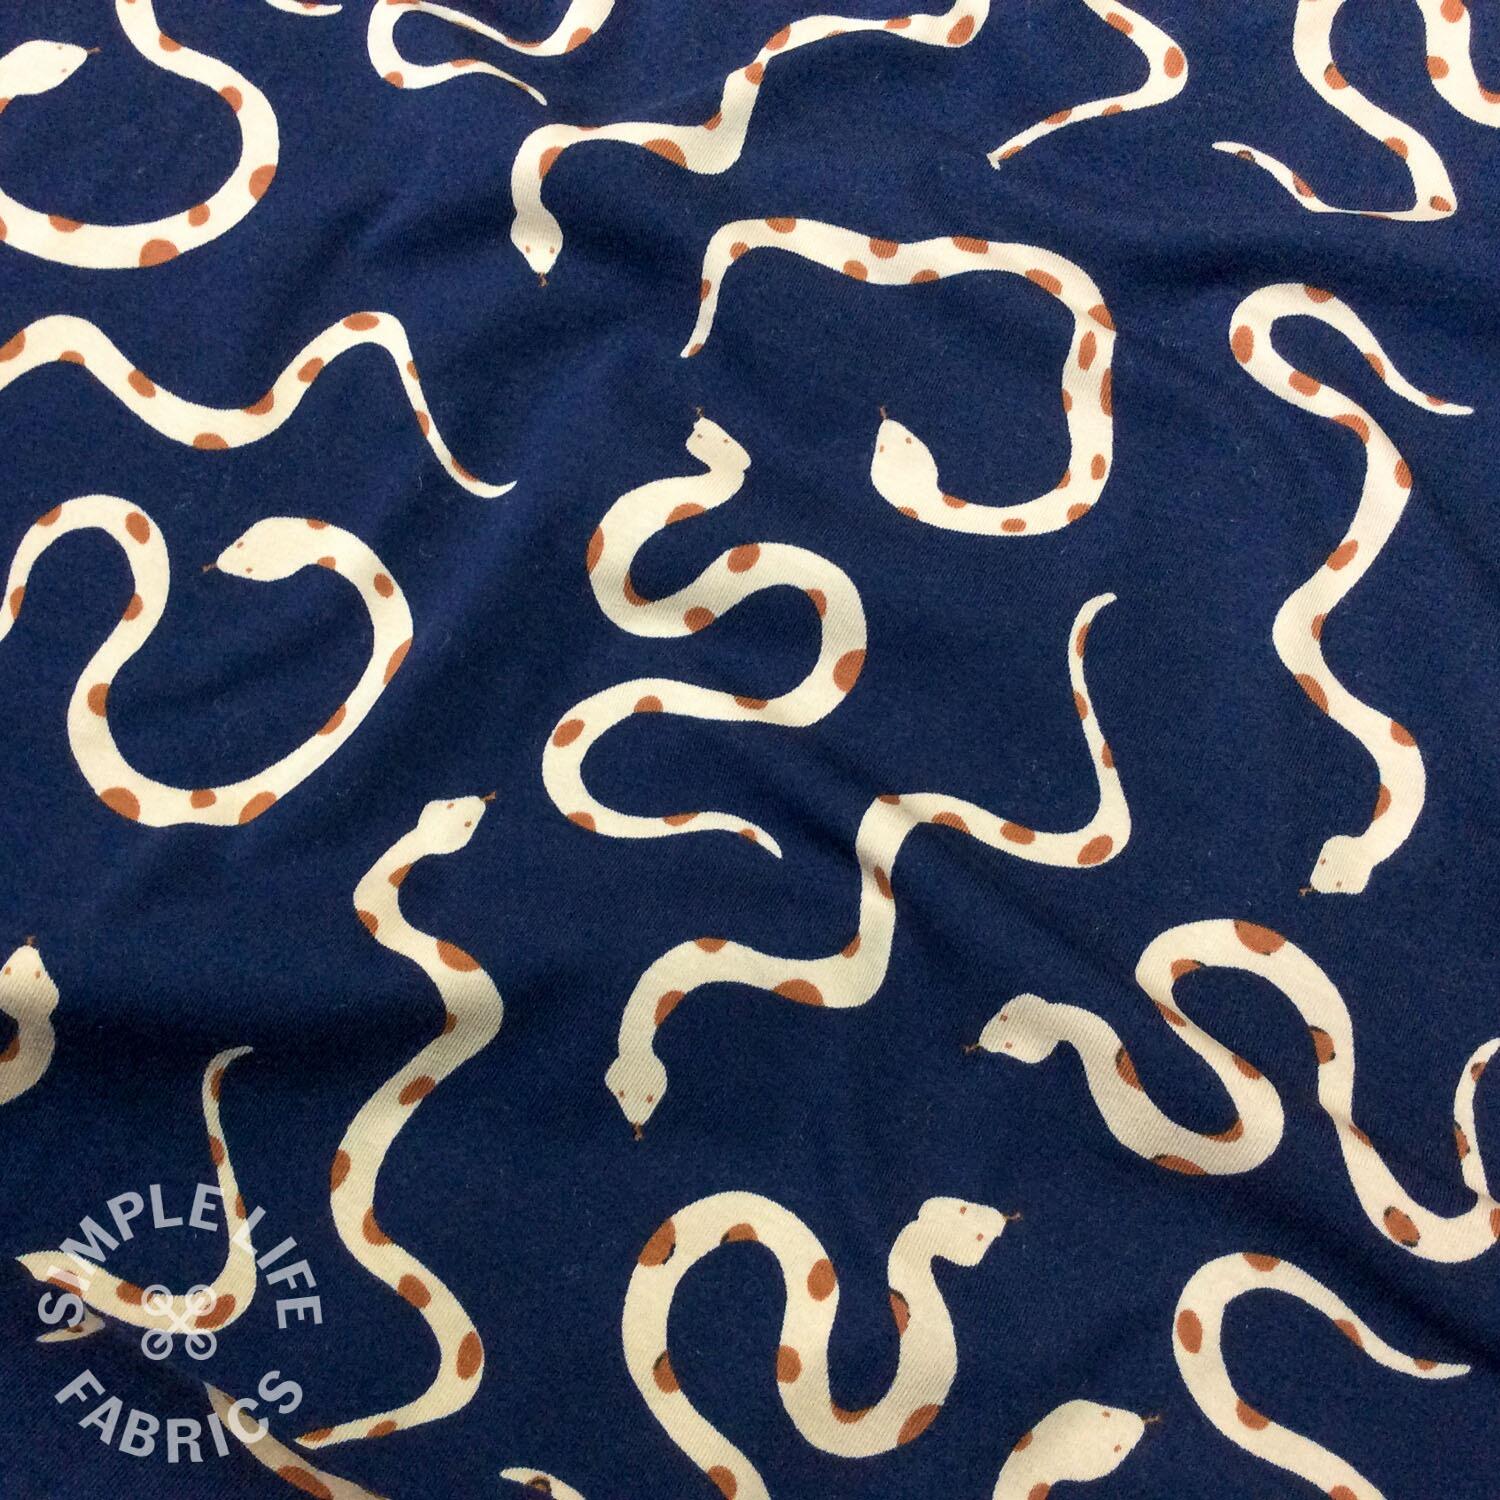 Snakes jersey fabric